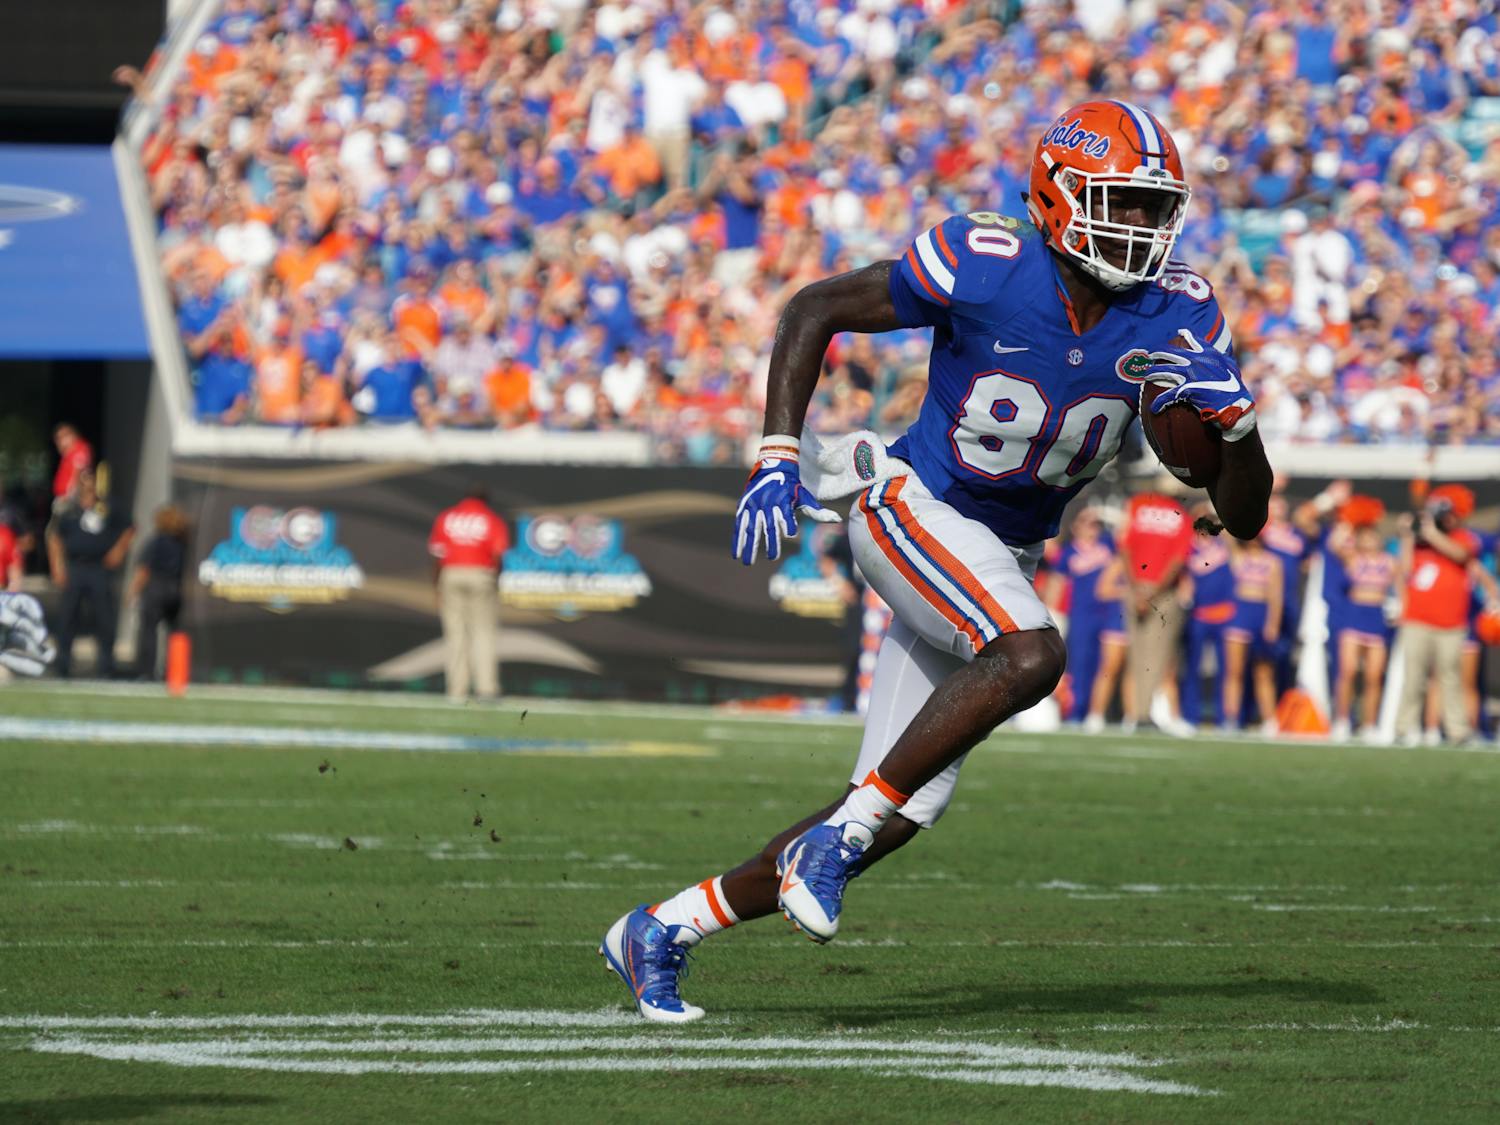 Florida tight end C'yontai Lewis overcame everything from his mother getting run over by two trucks to his father being sentenced to life in prison to him being ruled ineligible to play high school football.